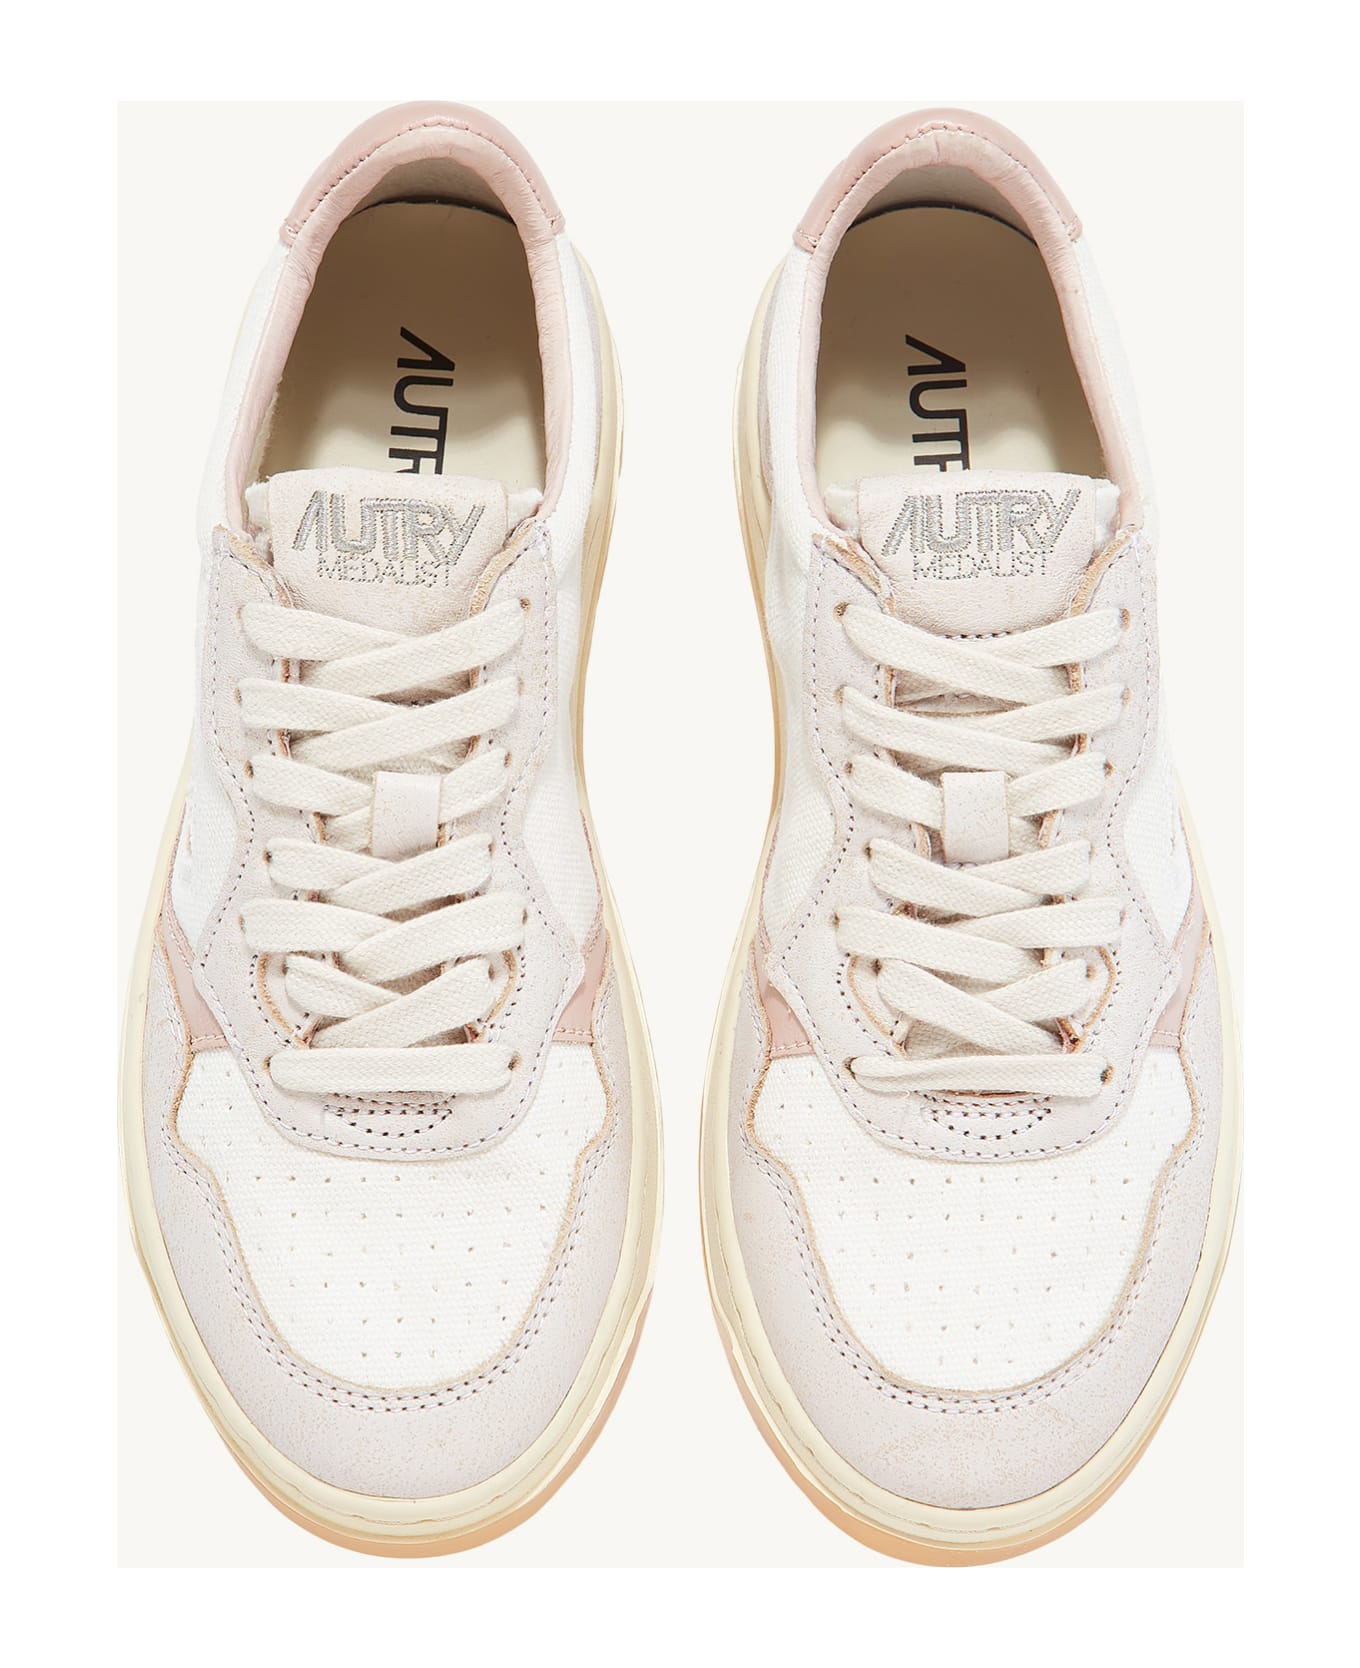 Autry Medalist Low Man Sneakers - White Pow スニーカー